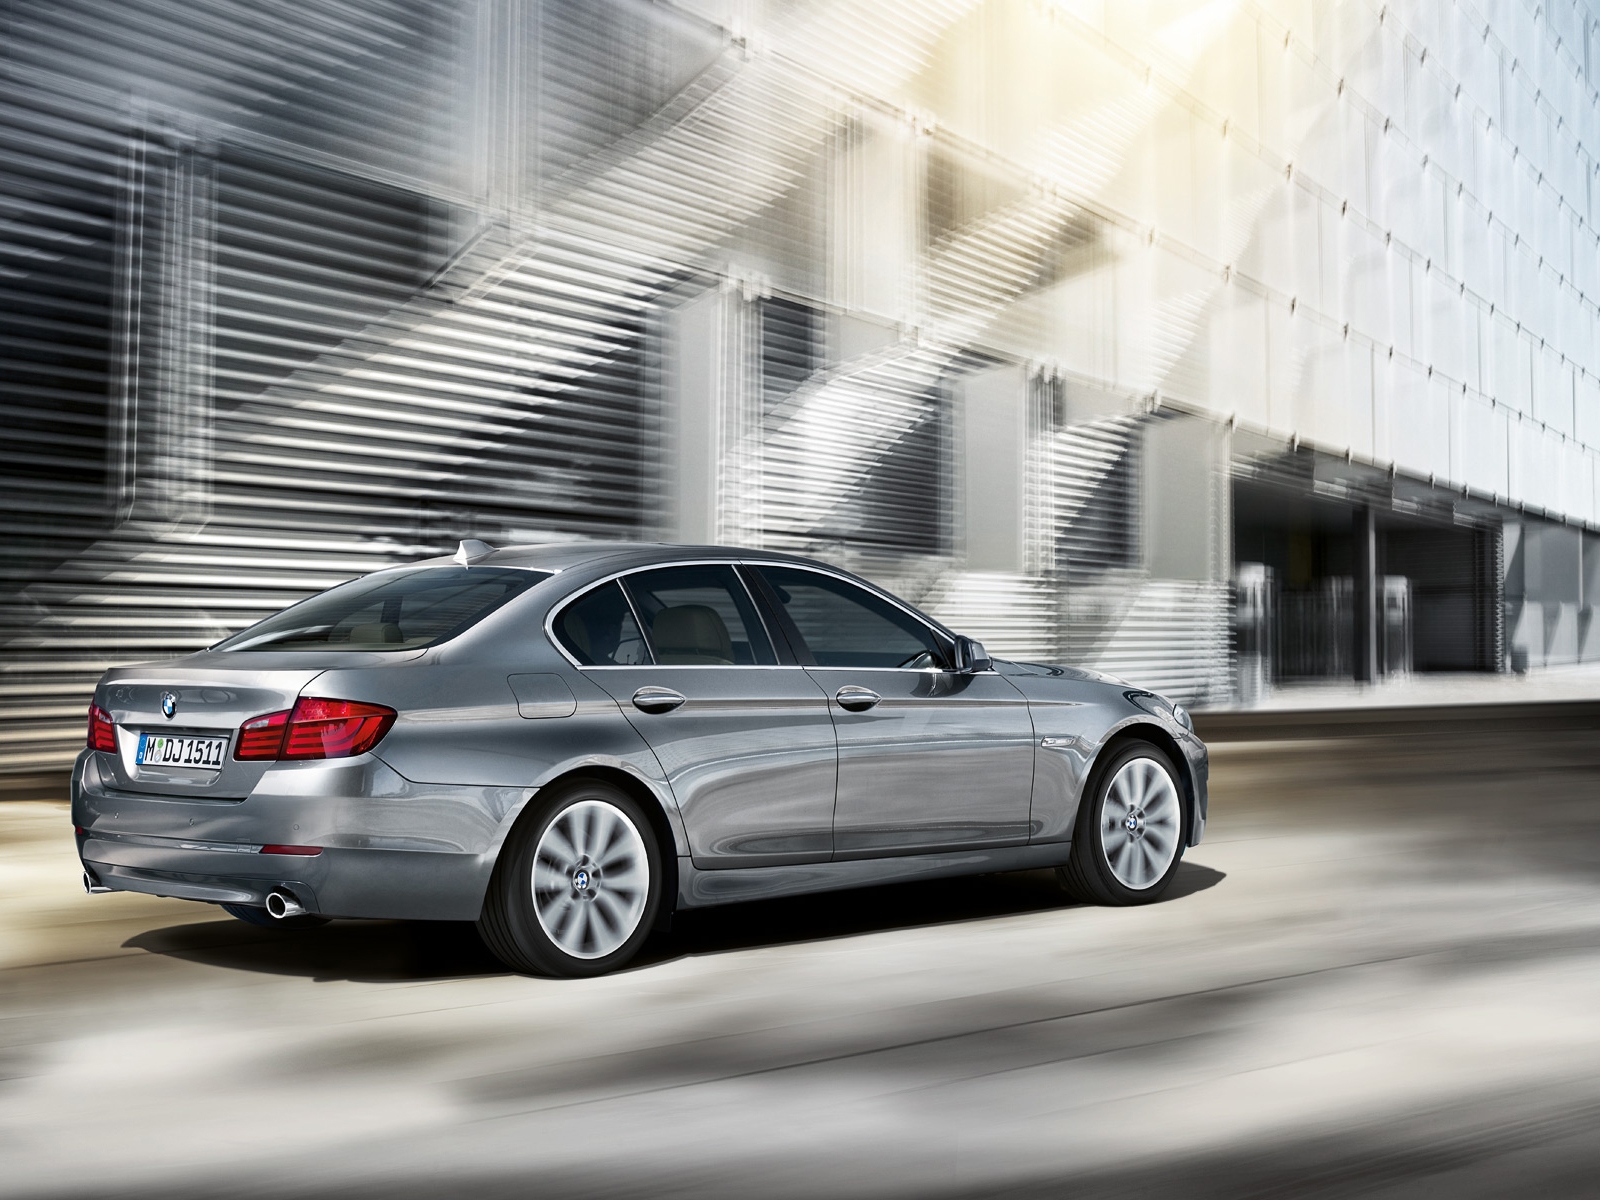 a better choice is BMW 535i, the fuel consum 5_SERIES_SEDAN